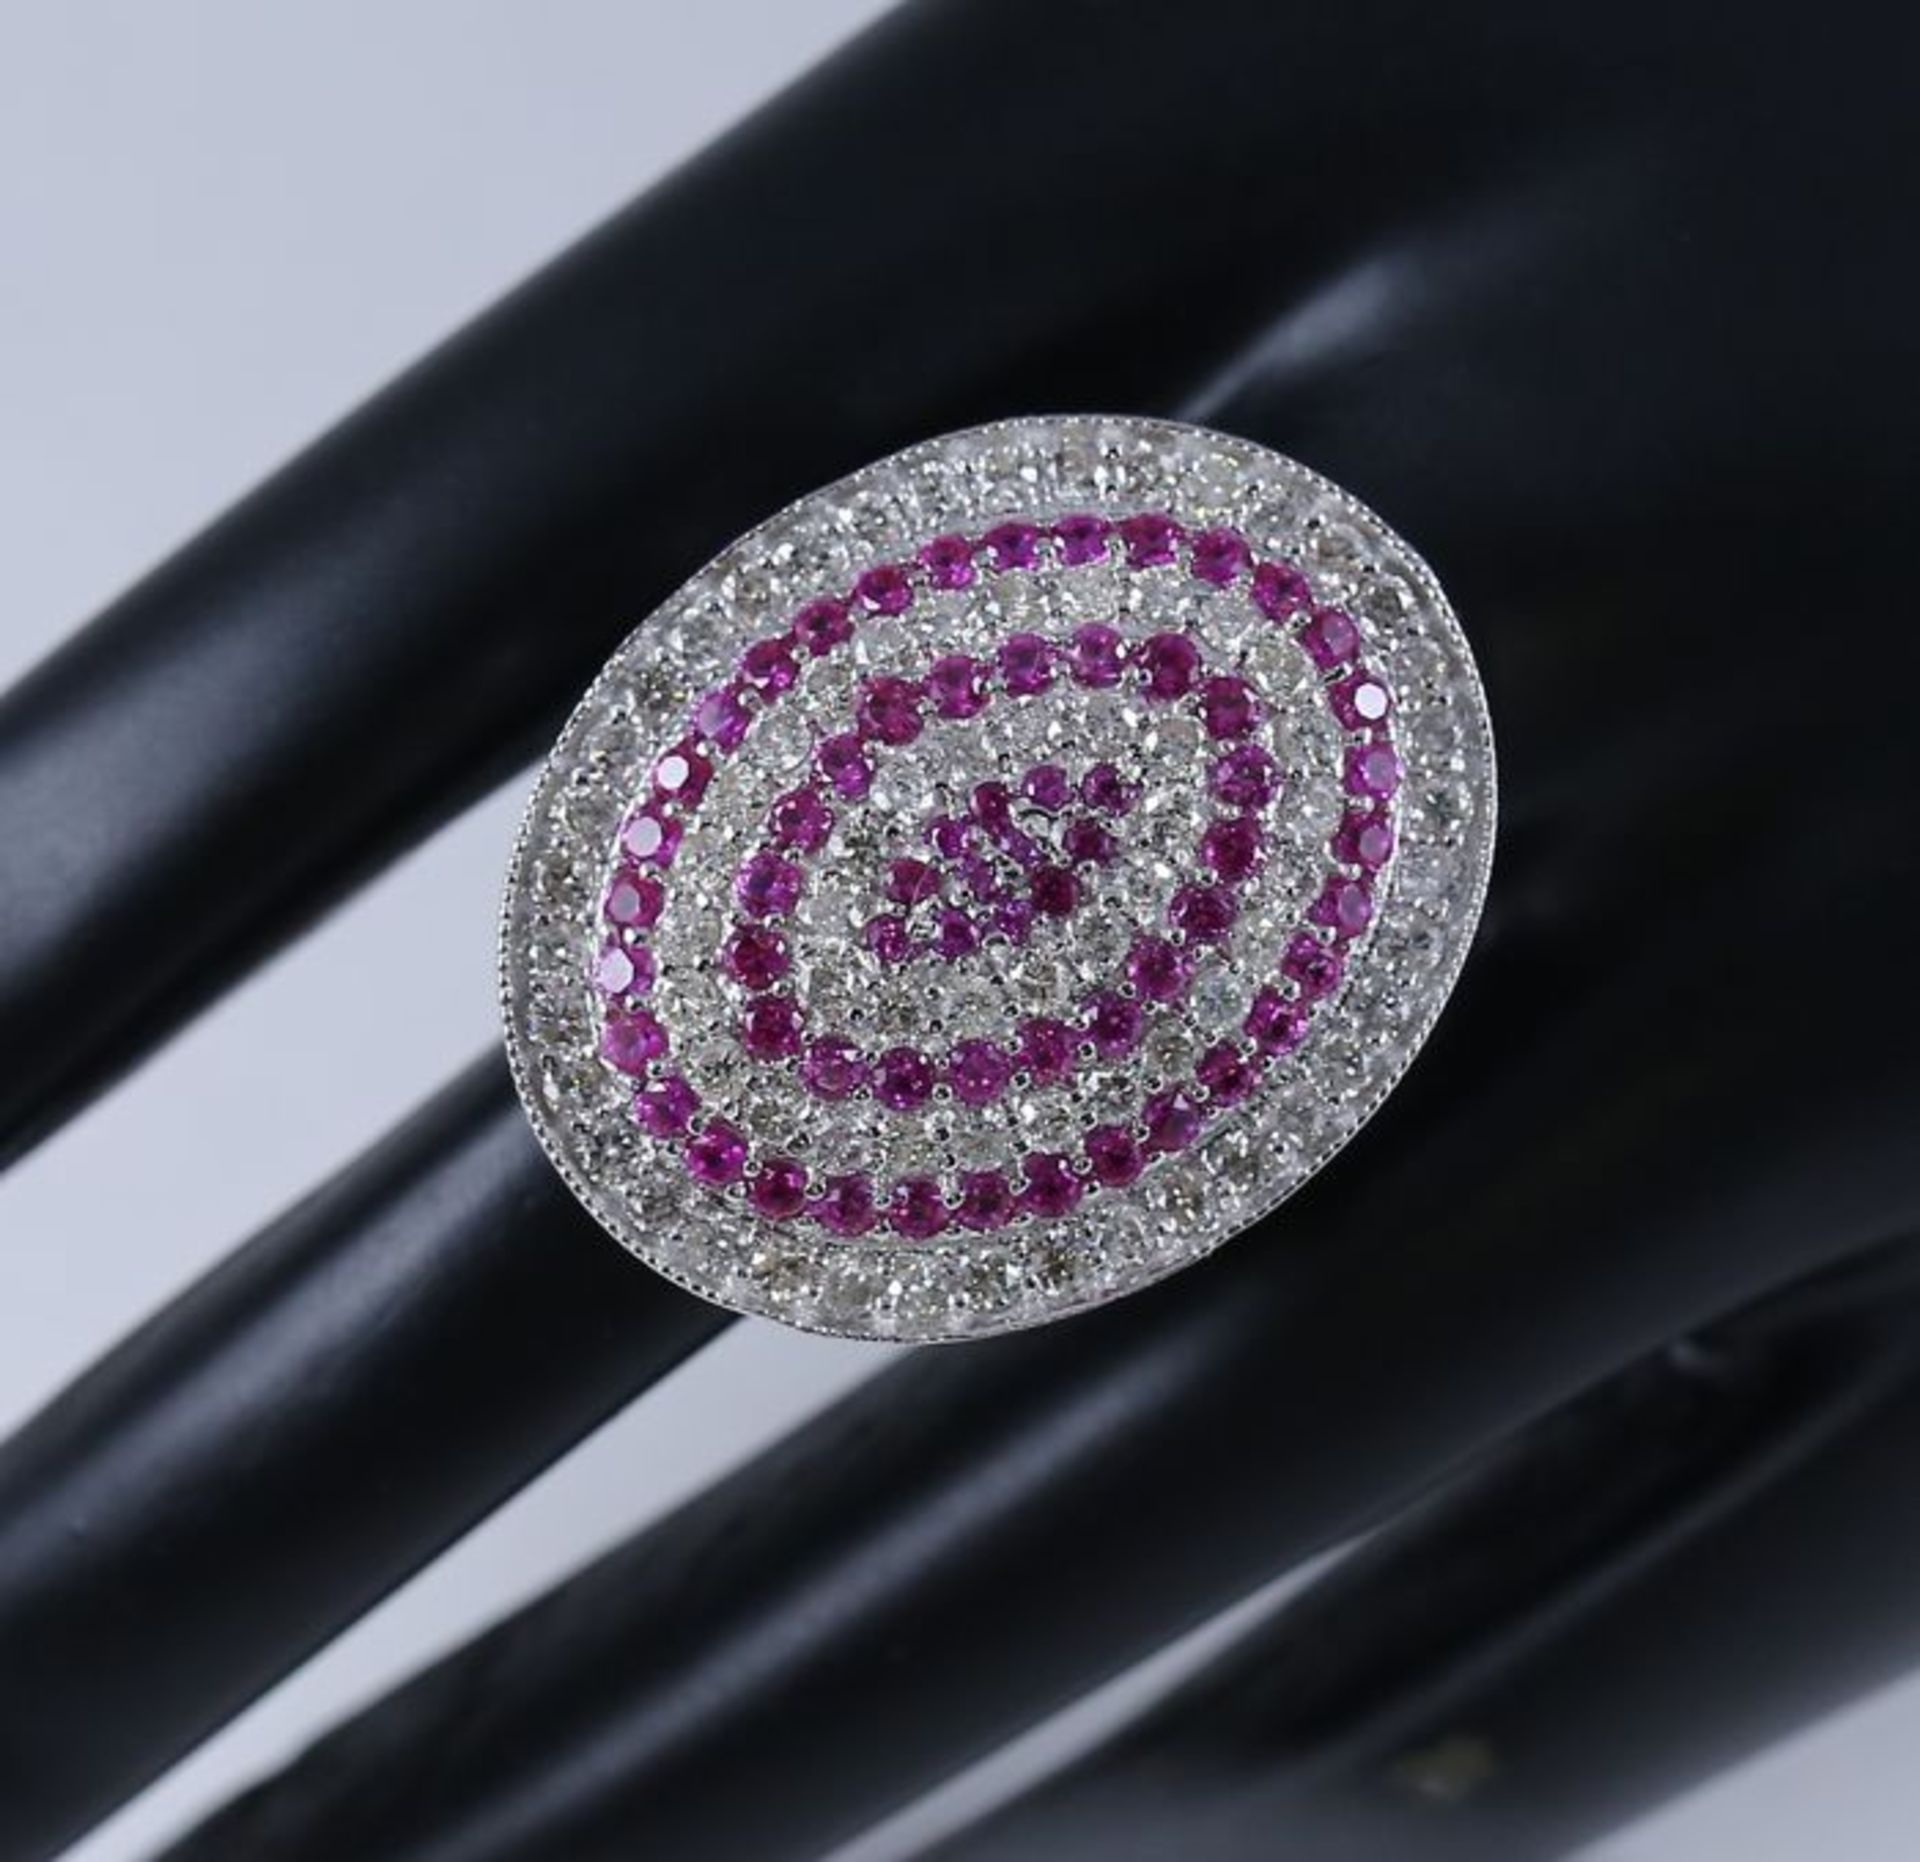 14 K / 585 Very Exclusive White Gold Diamond and Ruby Ring